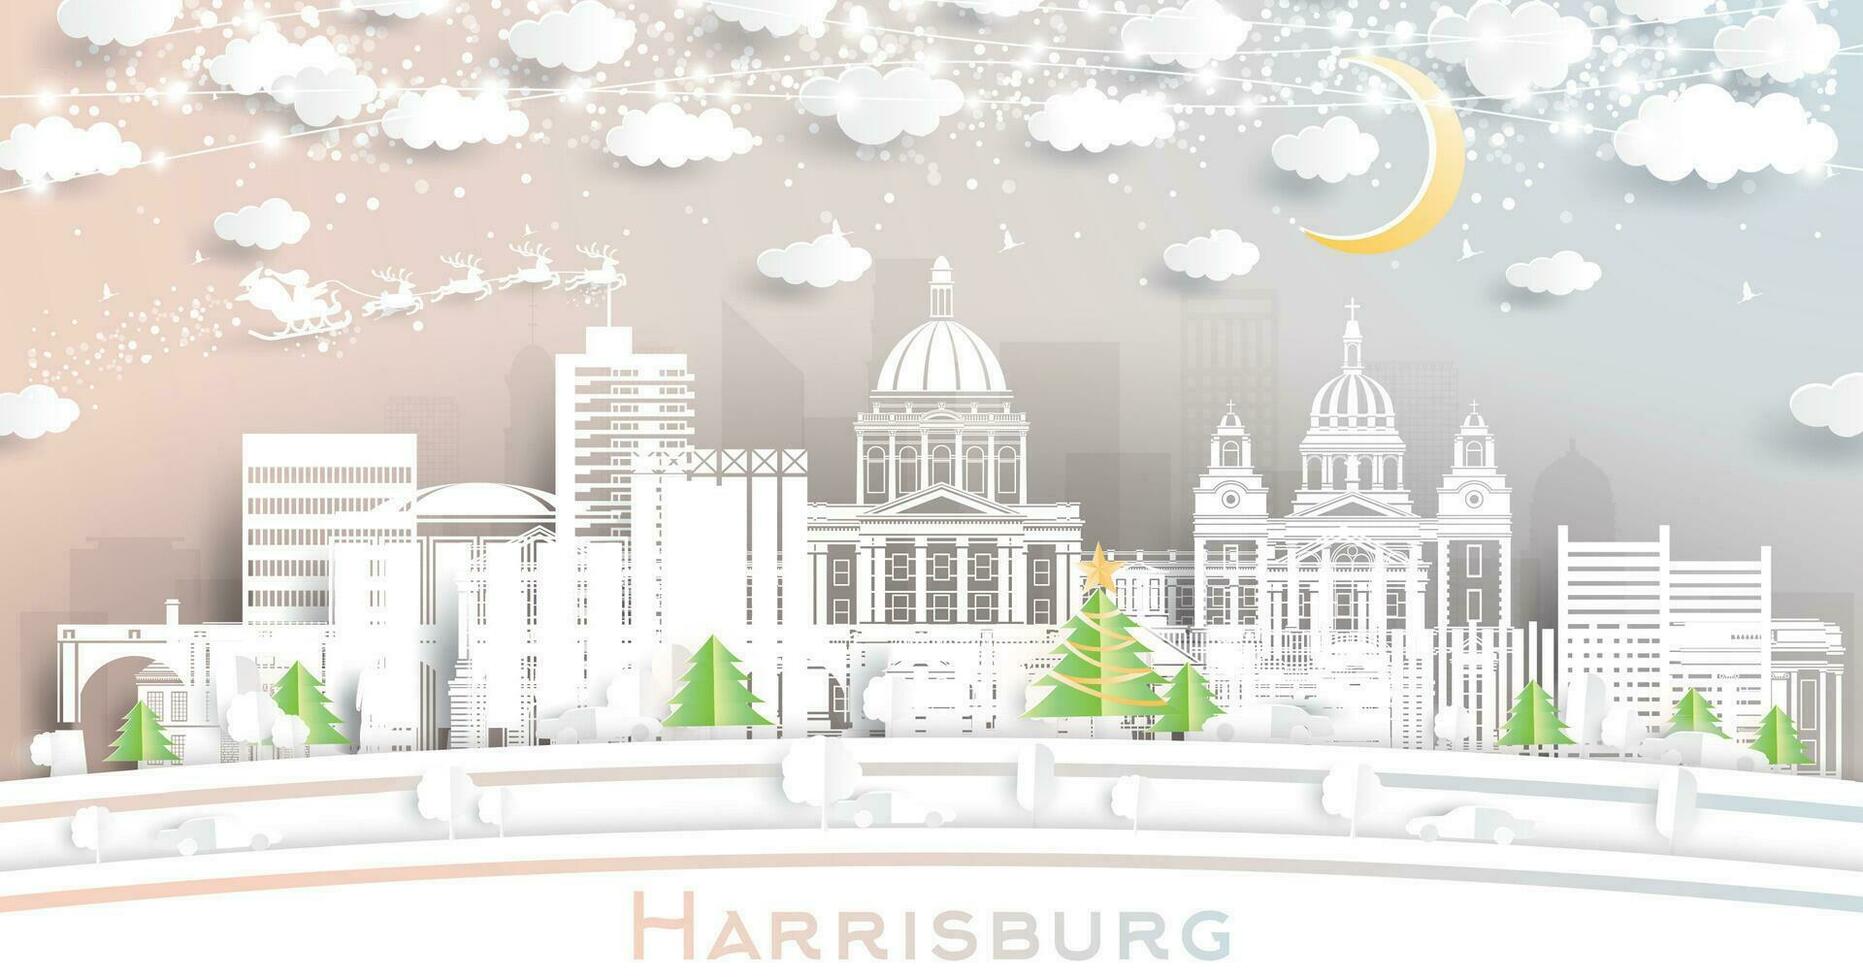 Harrisburg Pennsylvania USA. Winter City Skyline in Paper Cut Style with Snowflakes, Moon and Neon Garland. Christmas, New Year Concept. Santa Claus. Harrisburg Cityscape with Landmarks. vector